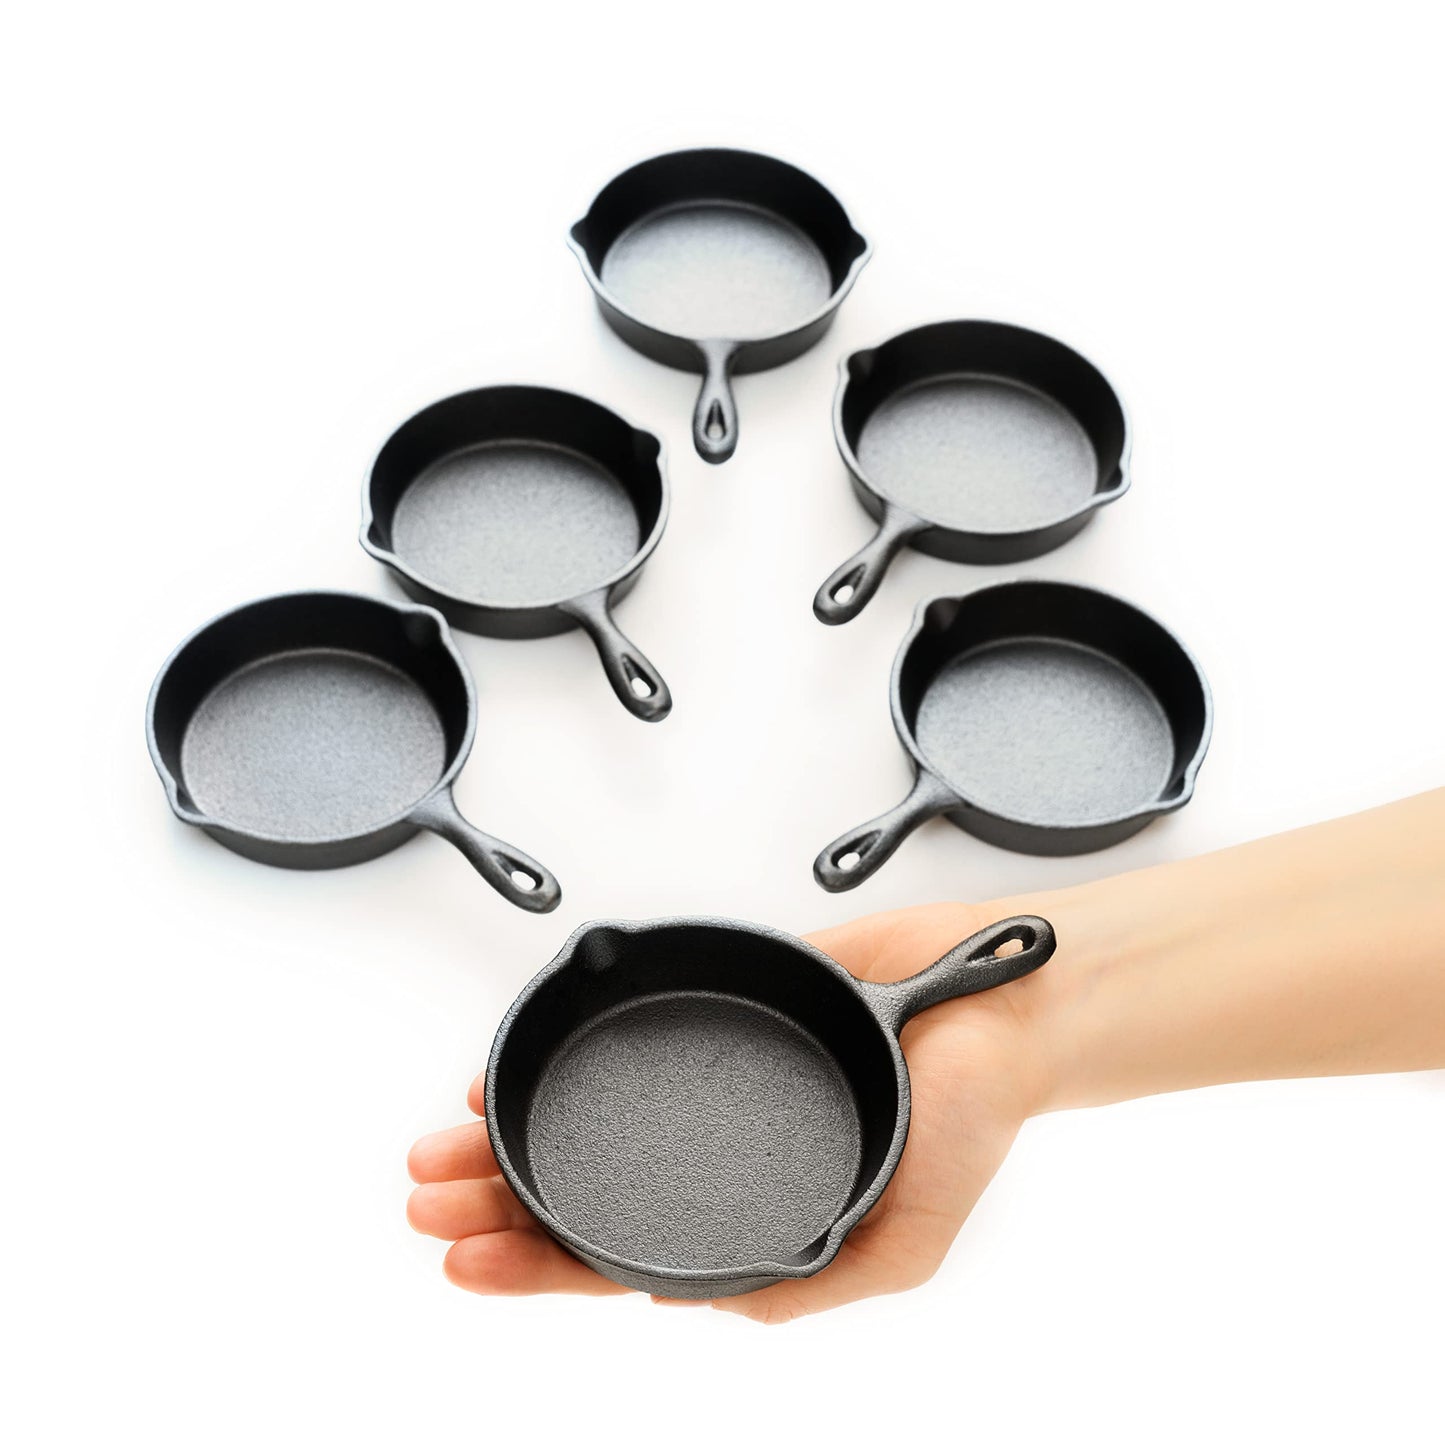 KUHA Biscuit Pan - Pre-Seasoned Cast Iron Skillet for Baking Biscuits,  Muffins, Mini Cakes - with Silicone Trivet